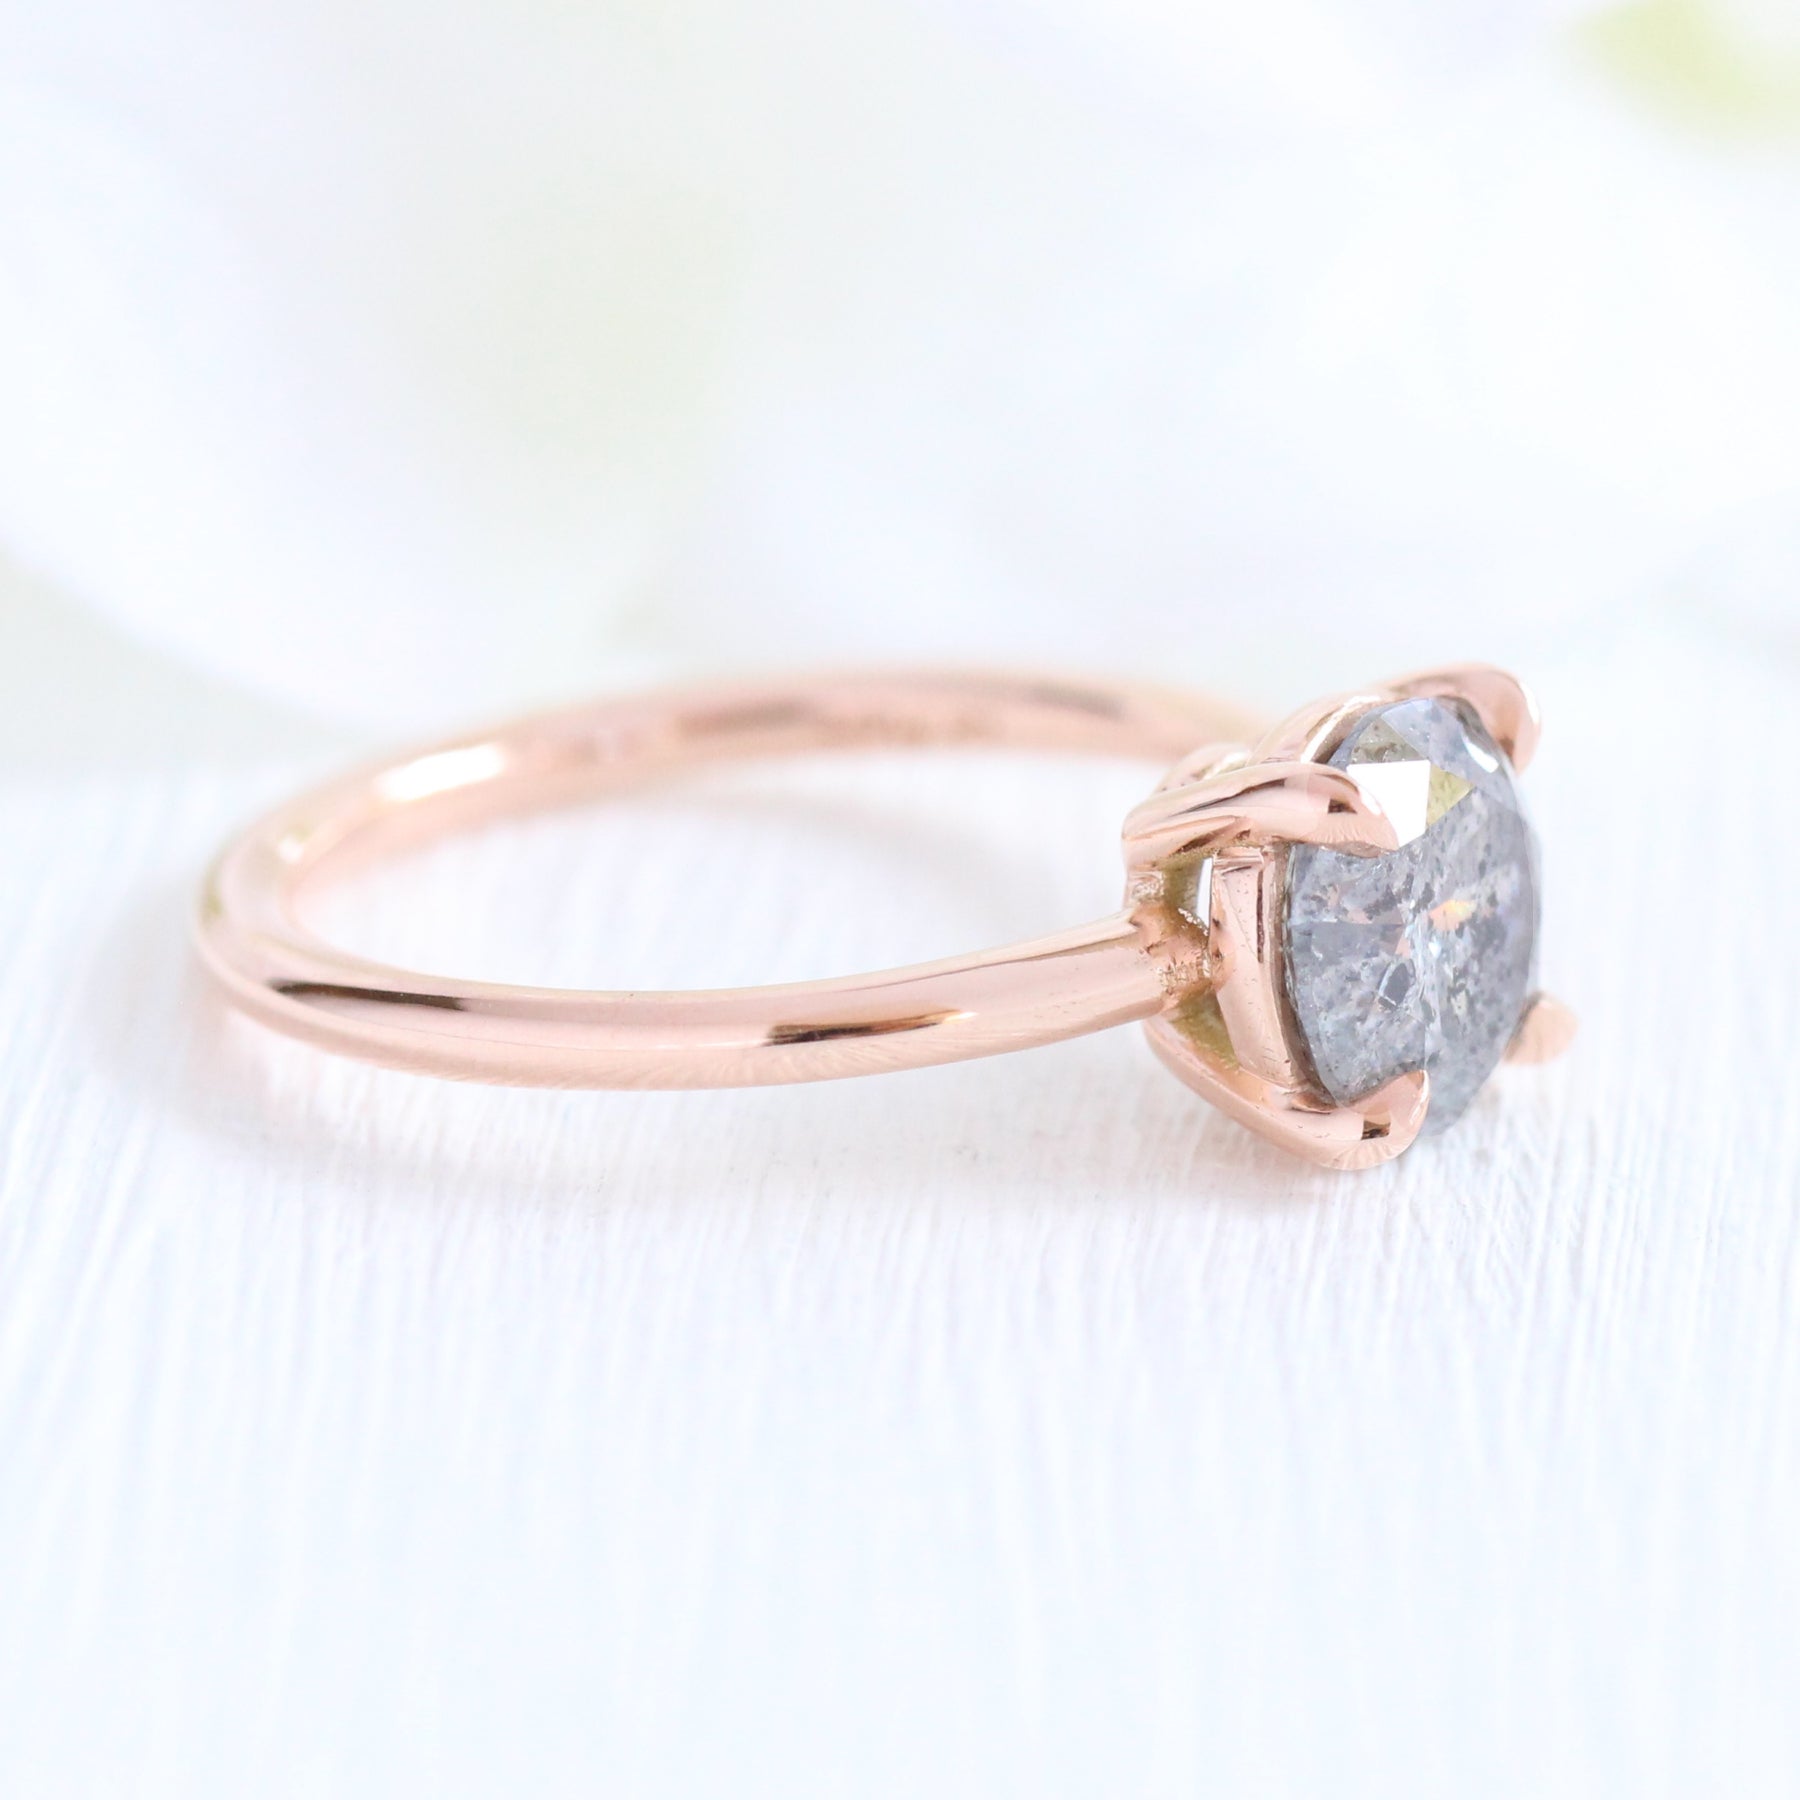 Large salt and pepper grey diamond ring rose gold 3 stone ring la more design jewelry